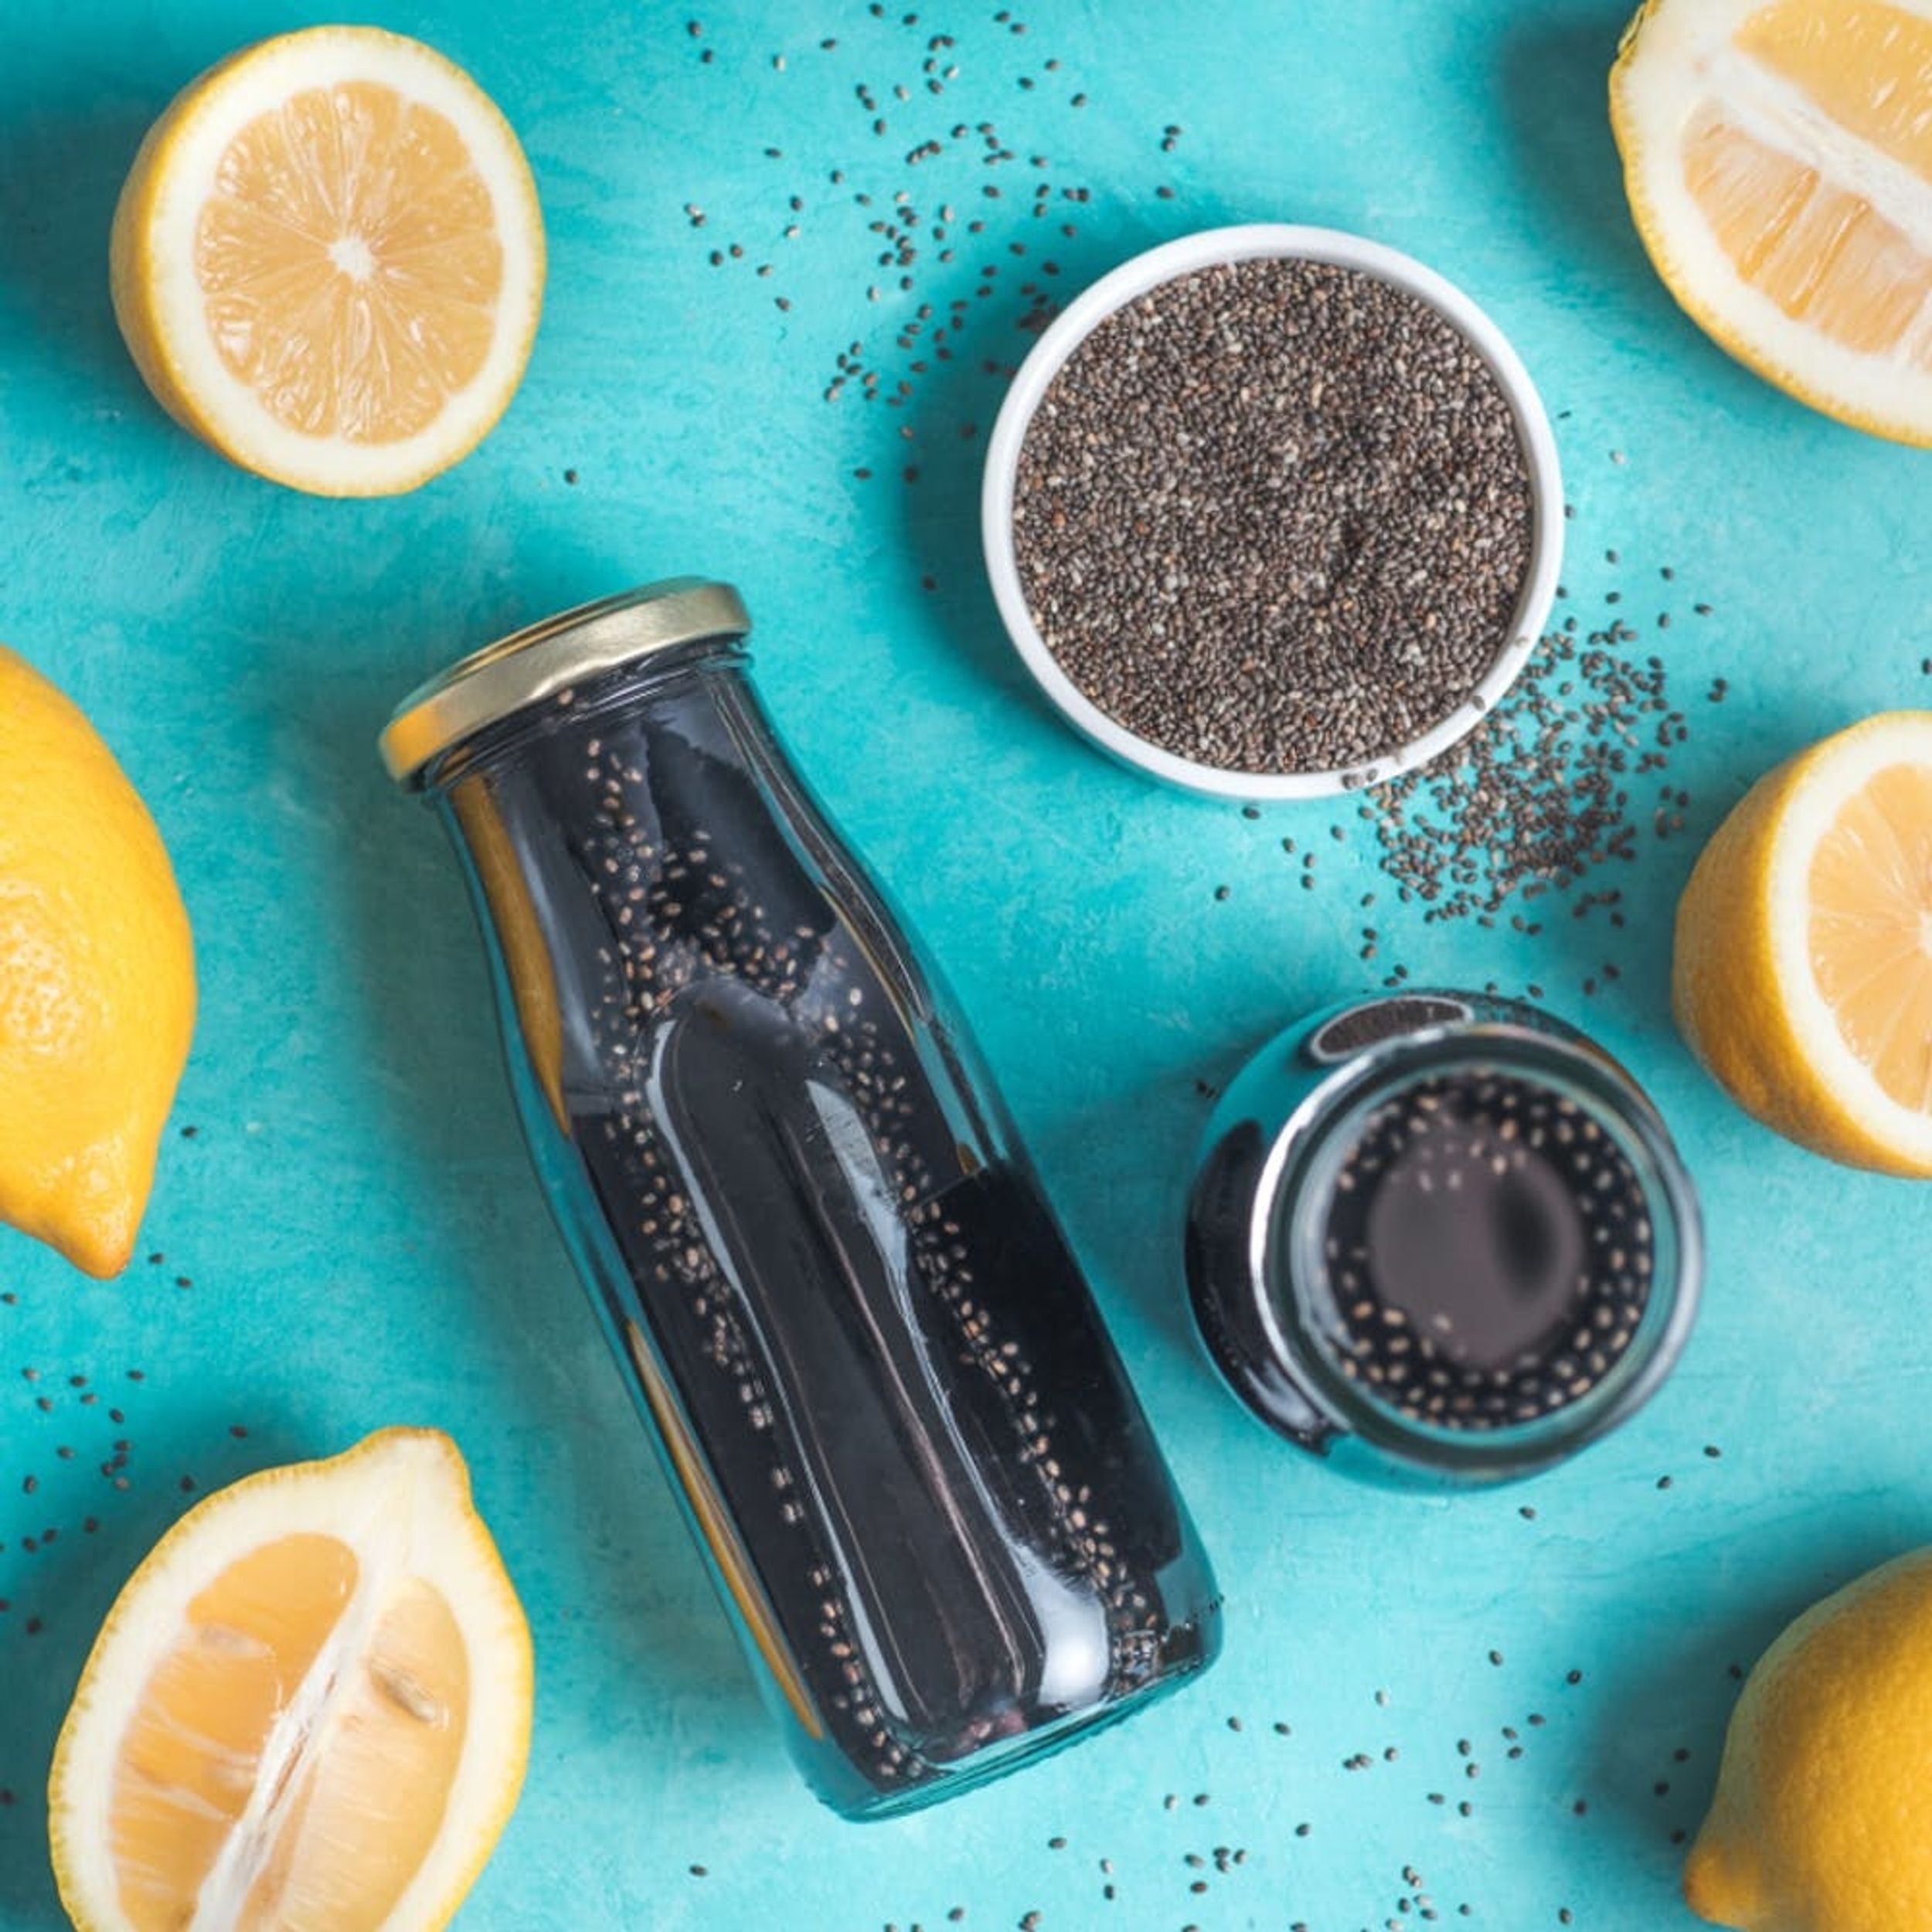 Here’s What You Need to Know About All of Those Trendy Activated Charcoal Products